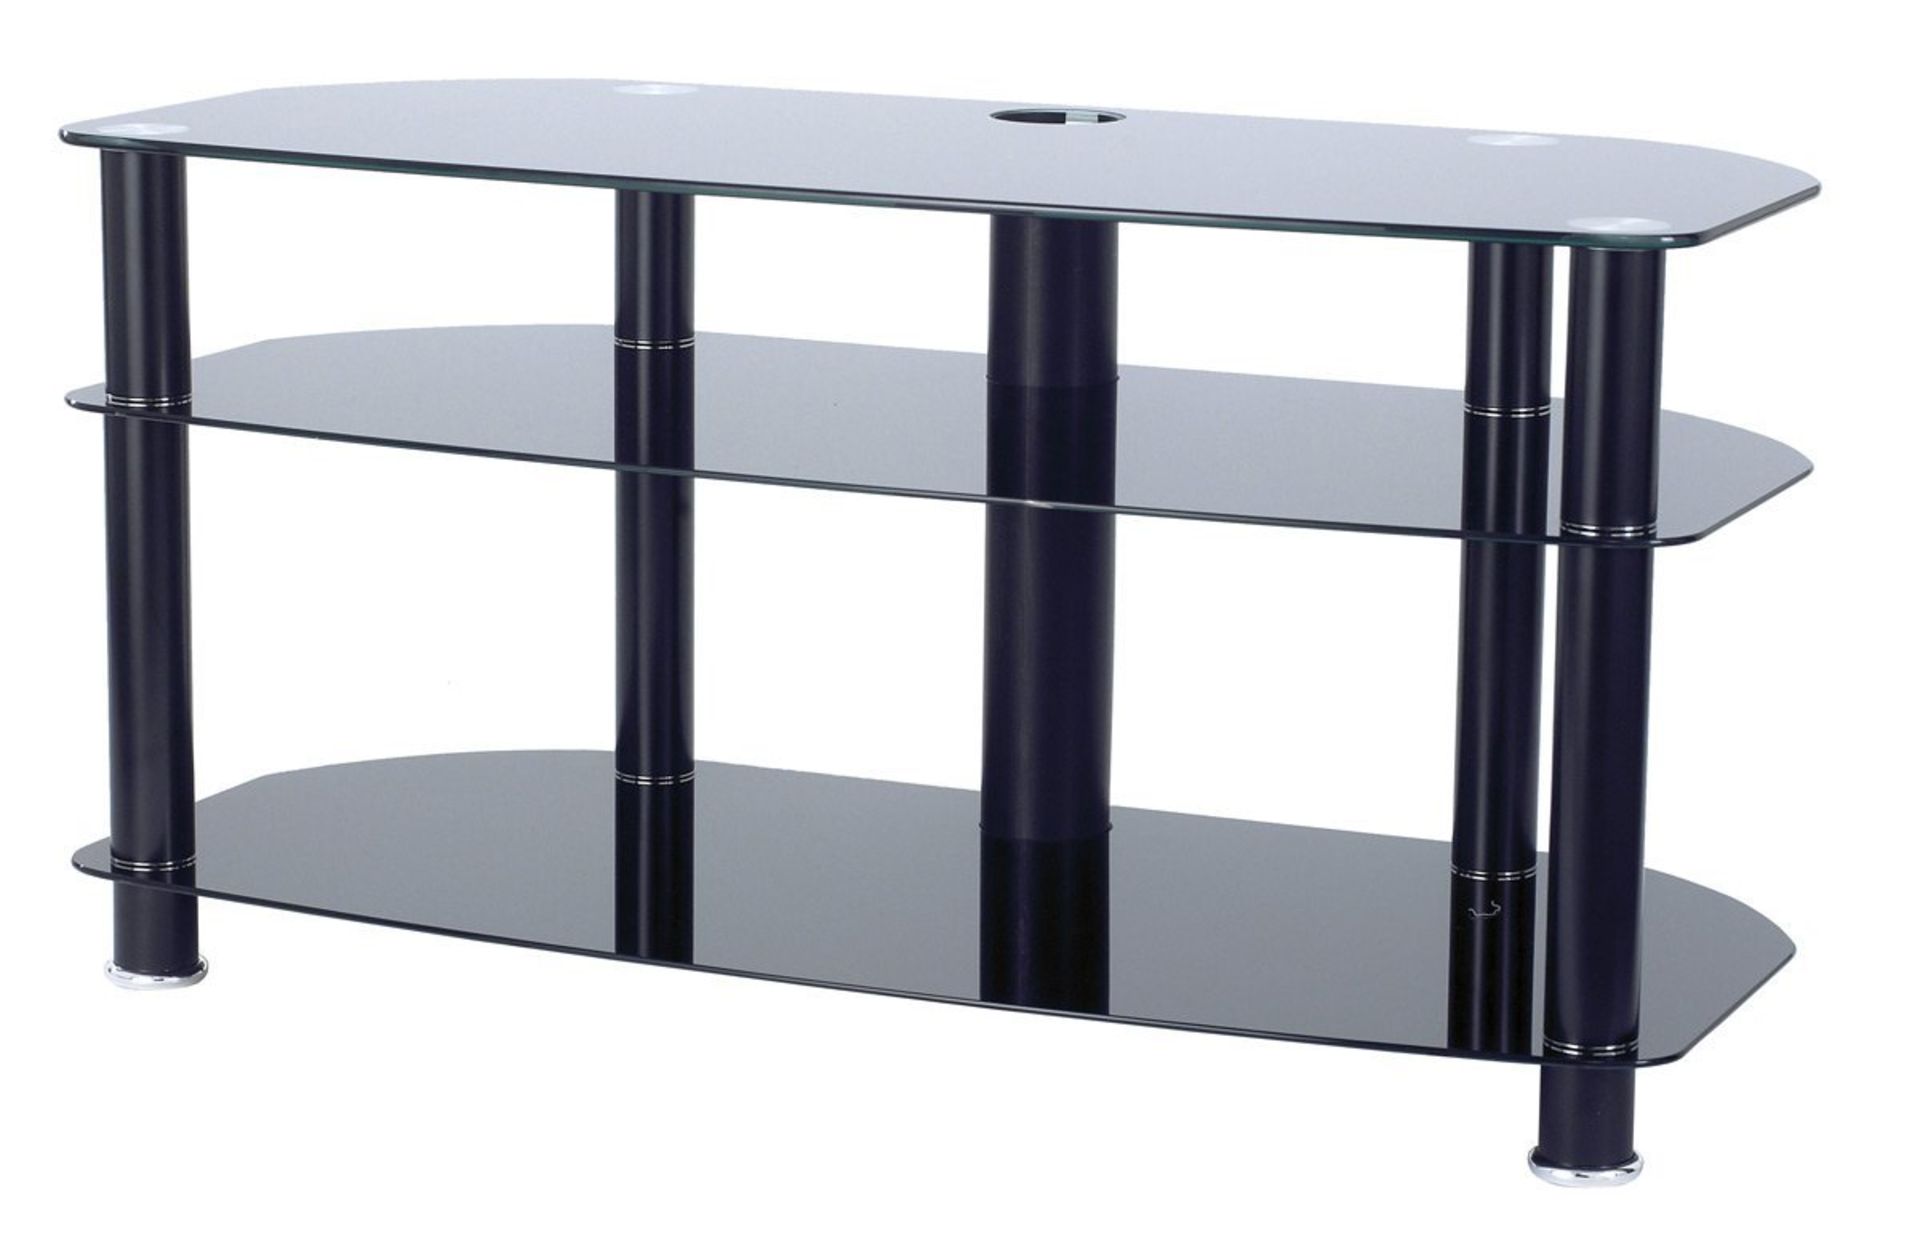 1 ALPHASON BLACK GLASS 3 TIER TV STAND RRP £89.99 (AS NEW)